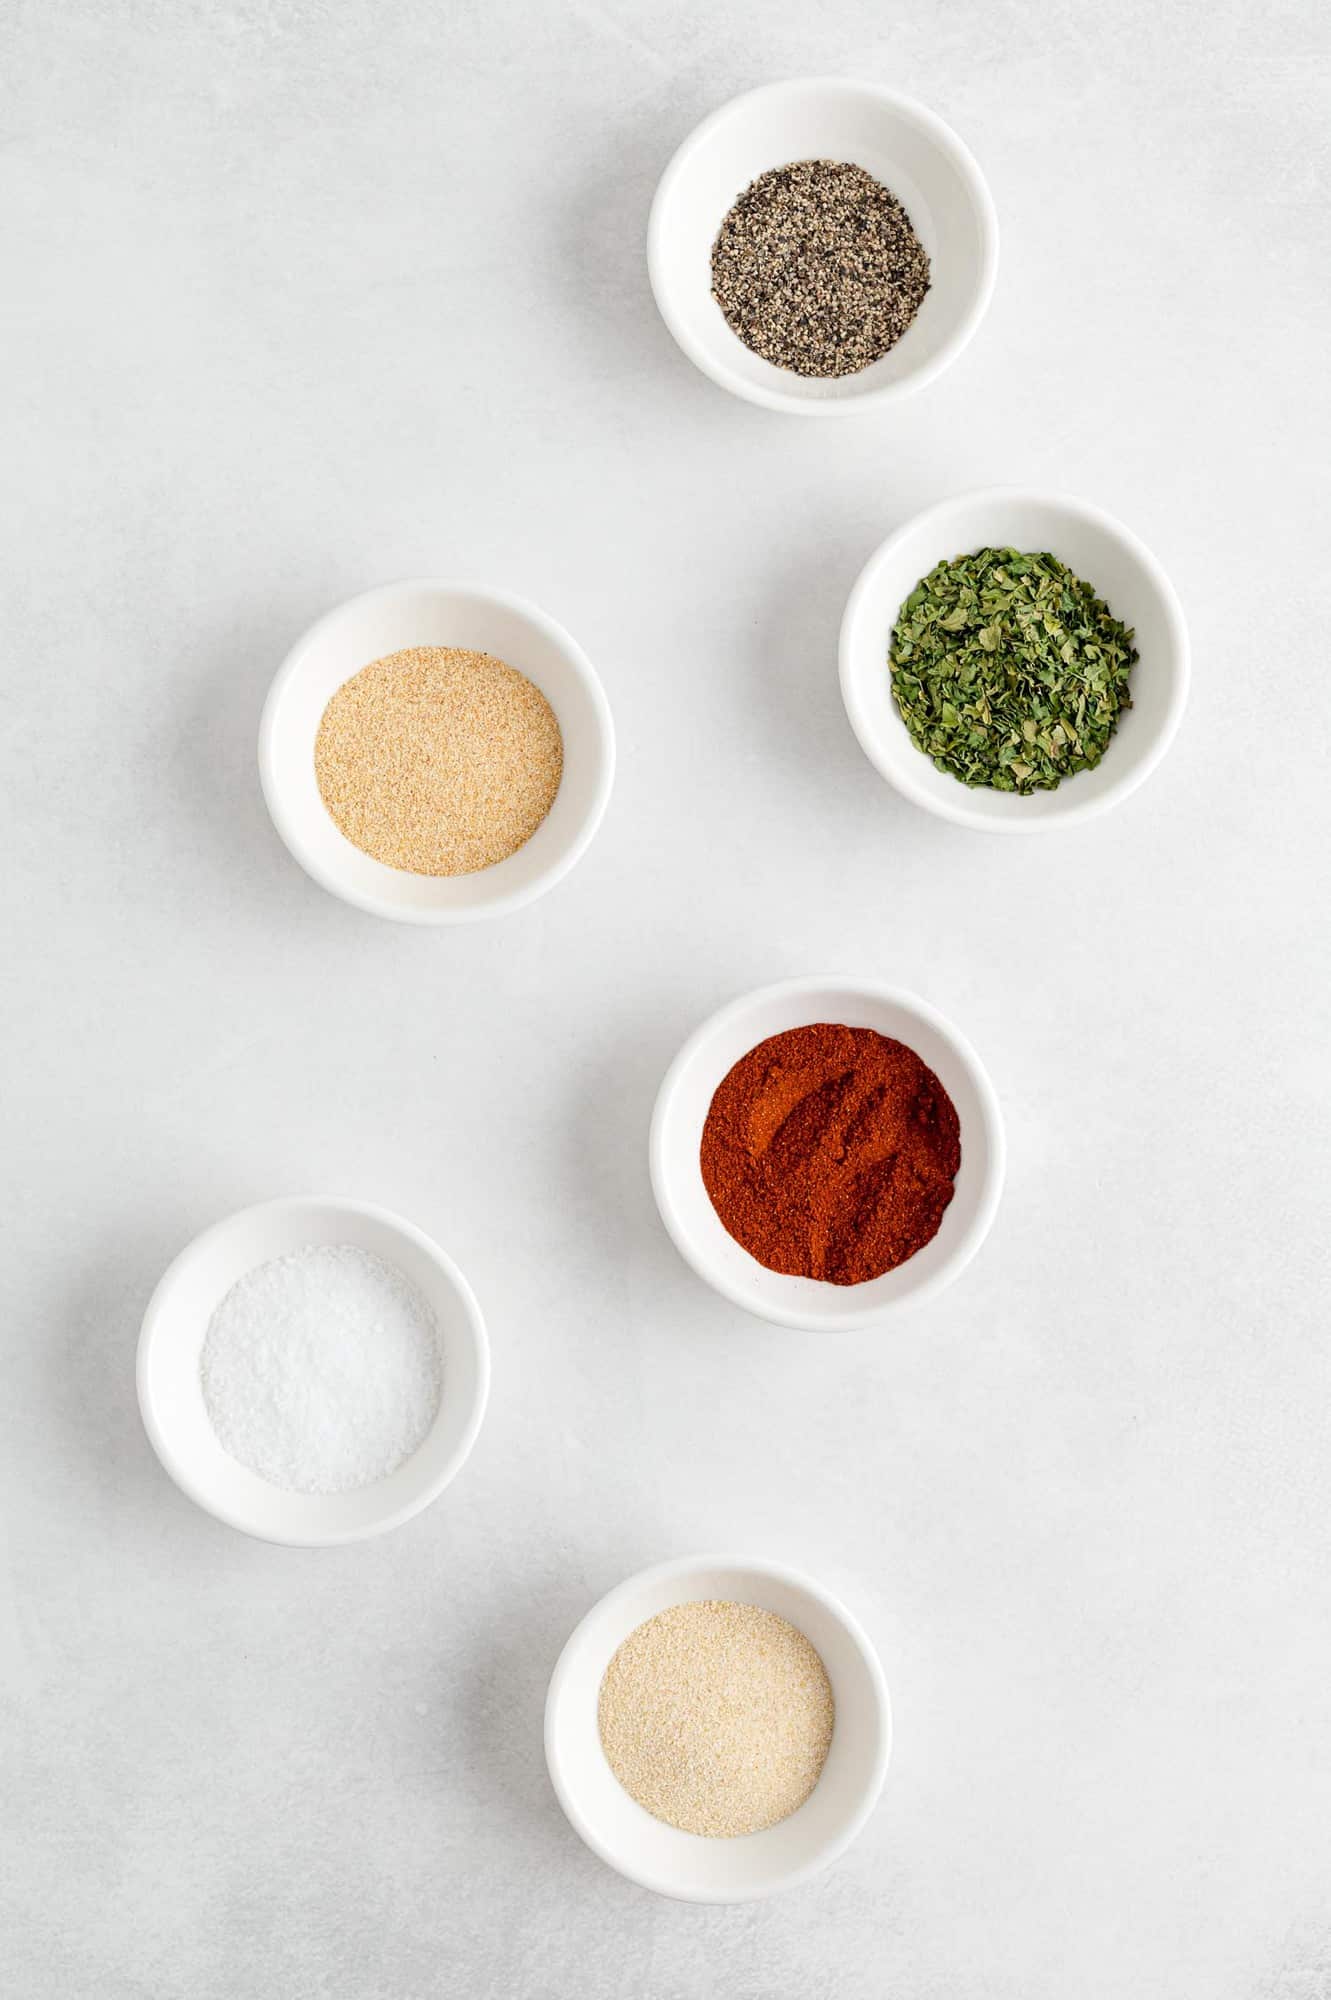 Overhead view of individual spices in small white bowls.